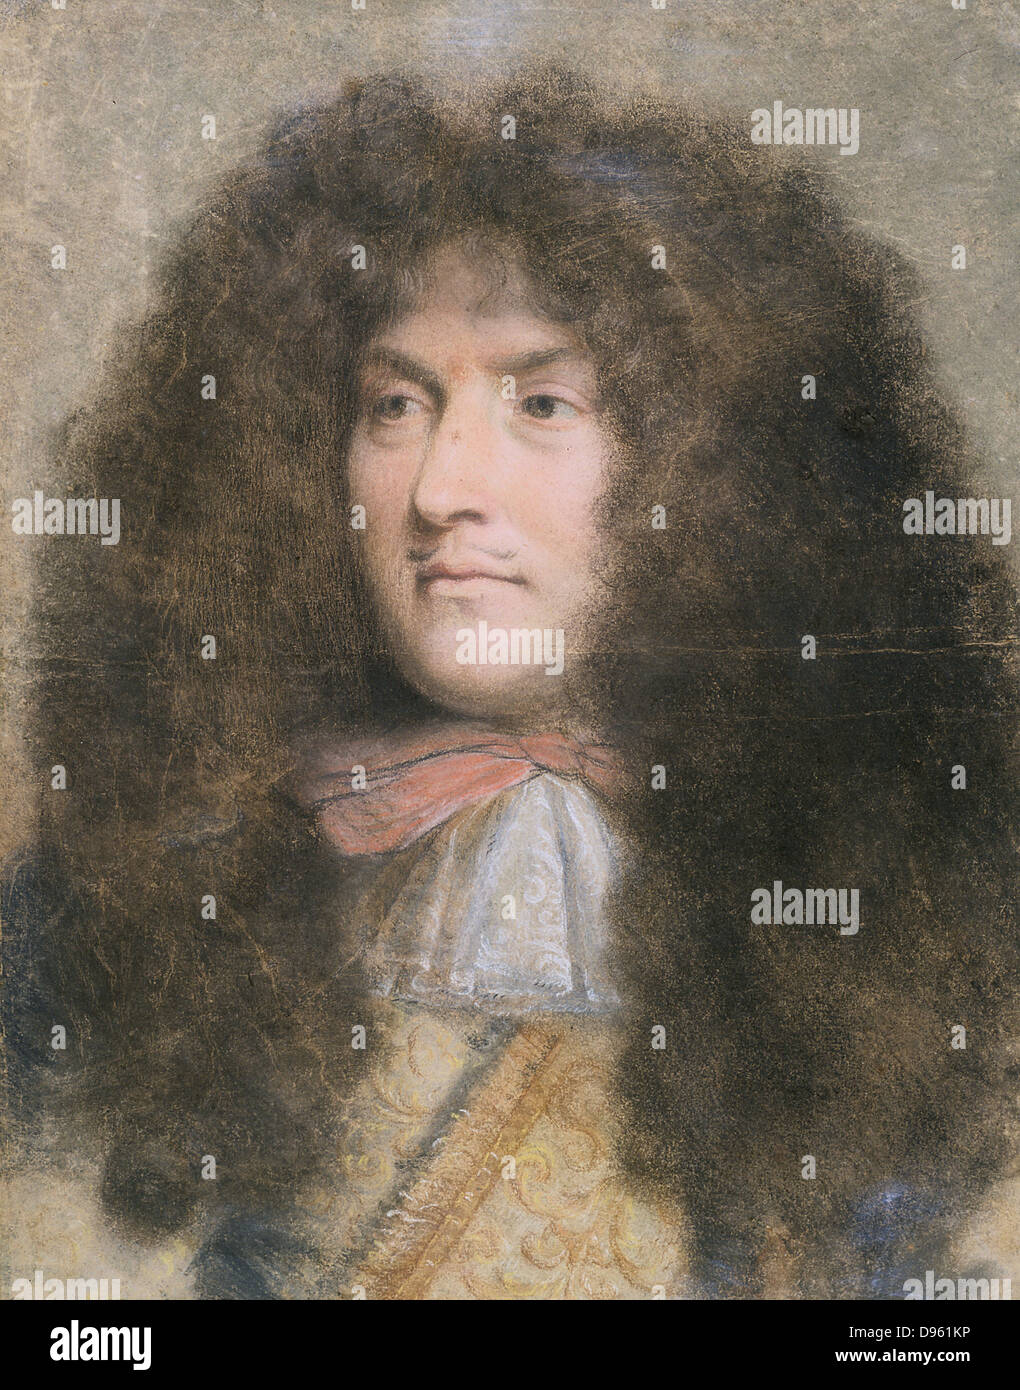 Louis XIV (1638-1715) King of France from 1643. Louis as a young man. Pastel by French artist Charles le Brun (1619-90). Louvre, Paris Stock Photo